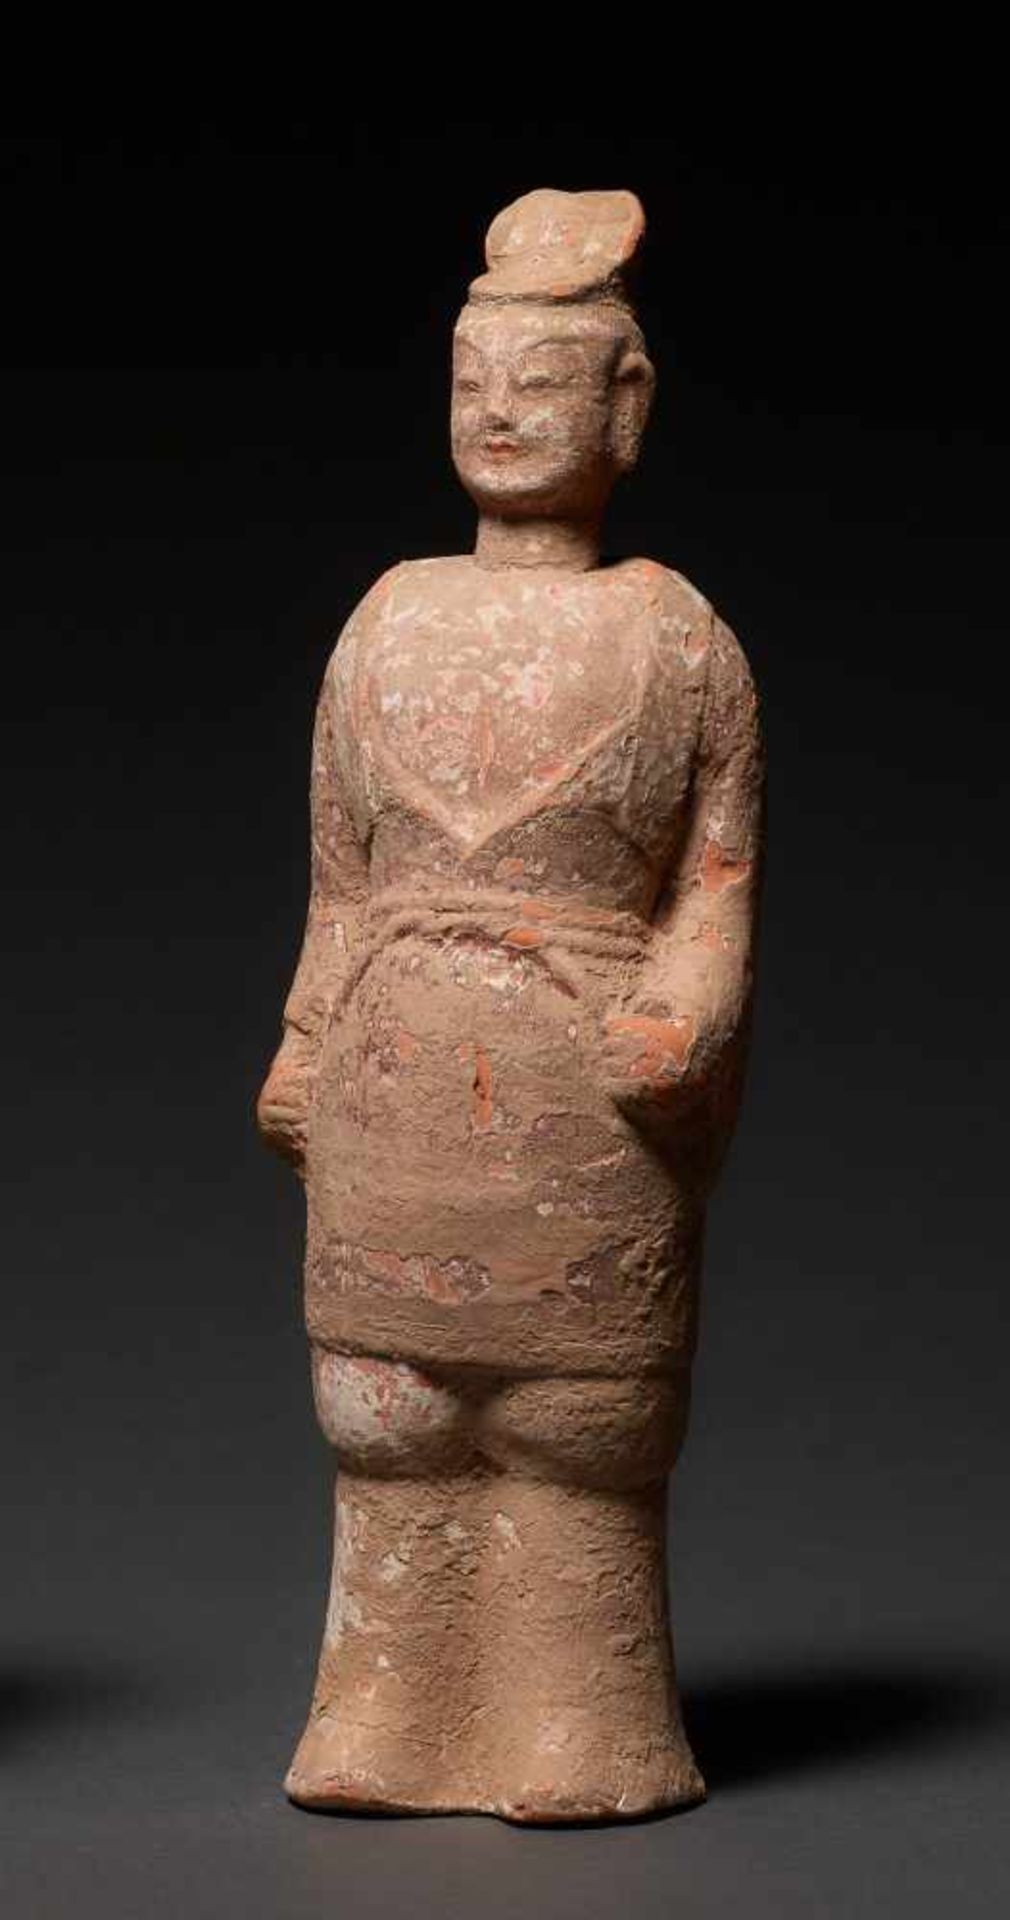 COURTIER Terracotta with painting. China, Wei Dynasty (5th to 6th cent.) A rare smaller figure